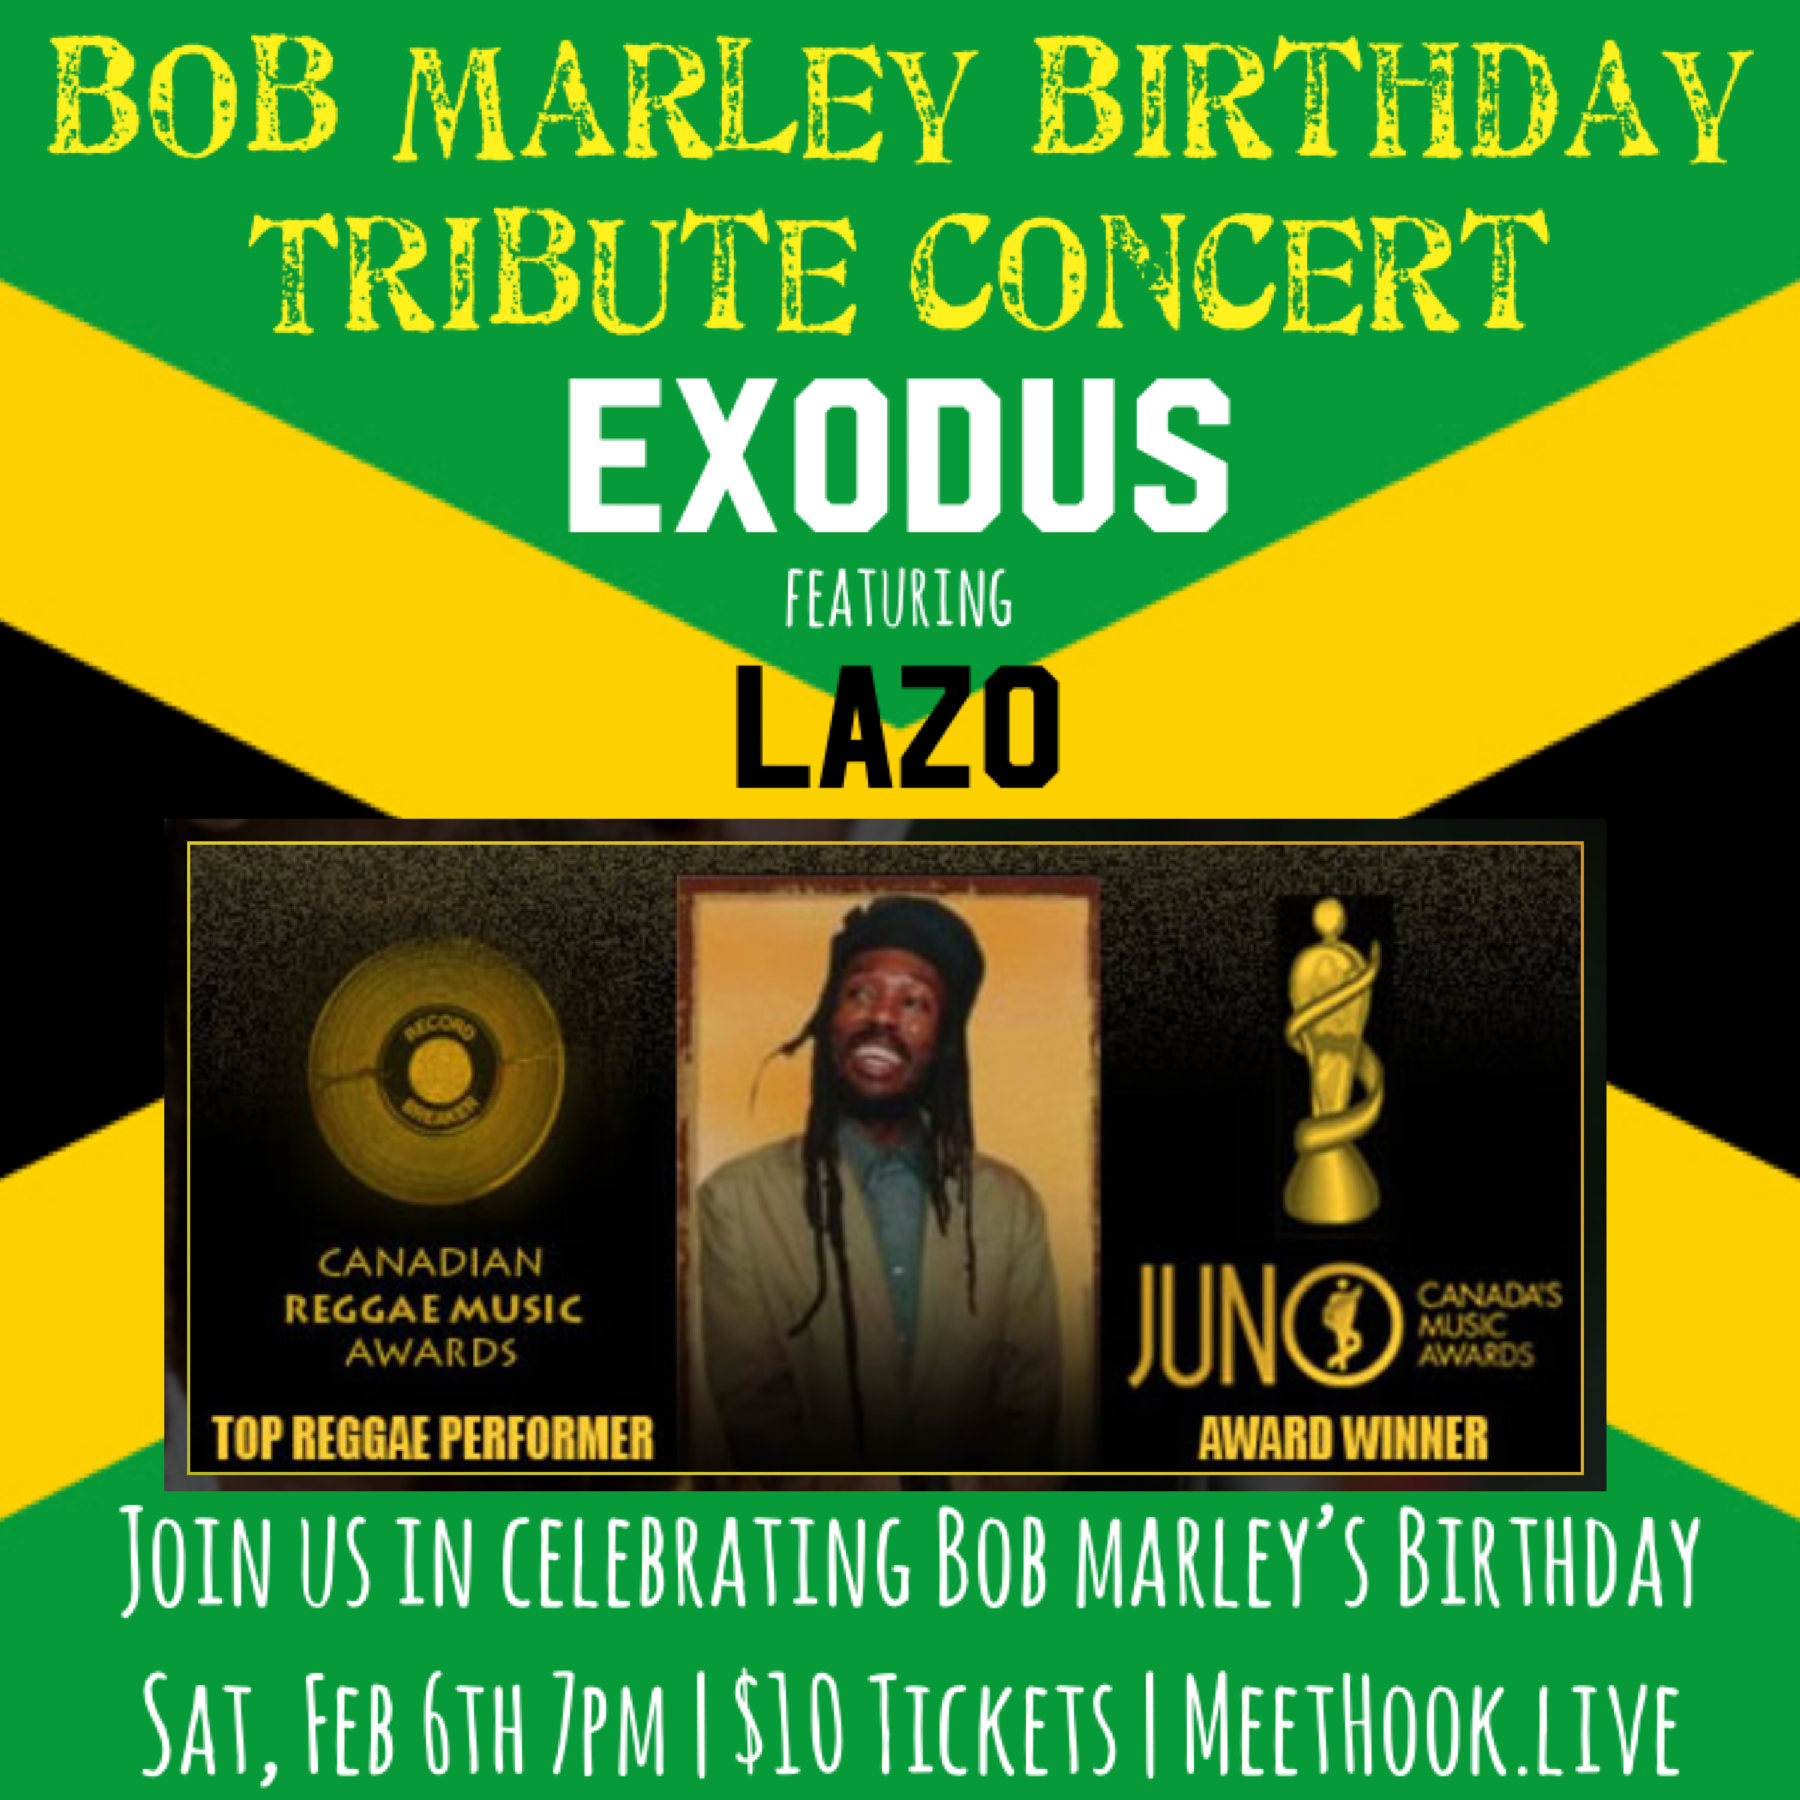 Exodus Band featuring Lazo in a Bob Marley 76th Bday Celebration Concert